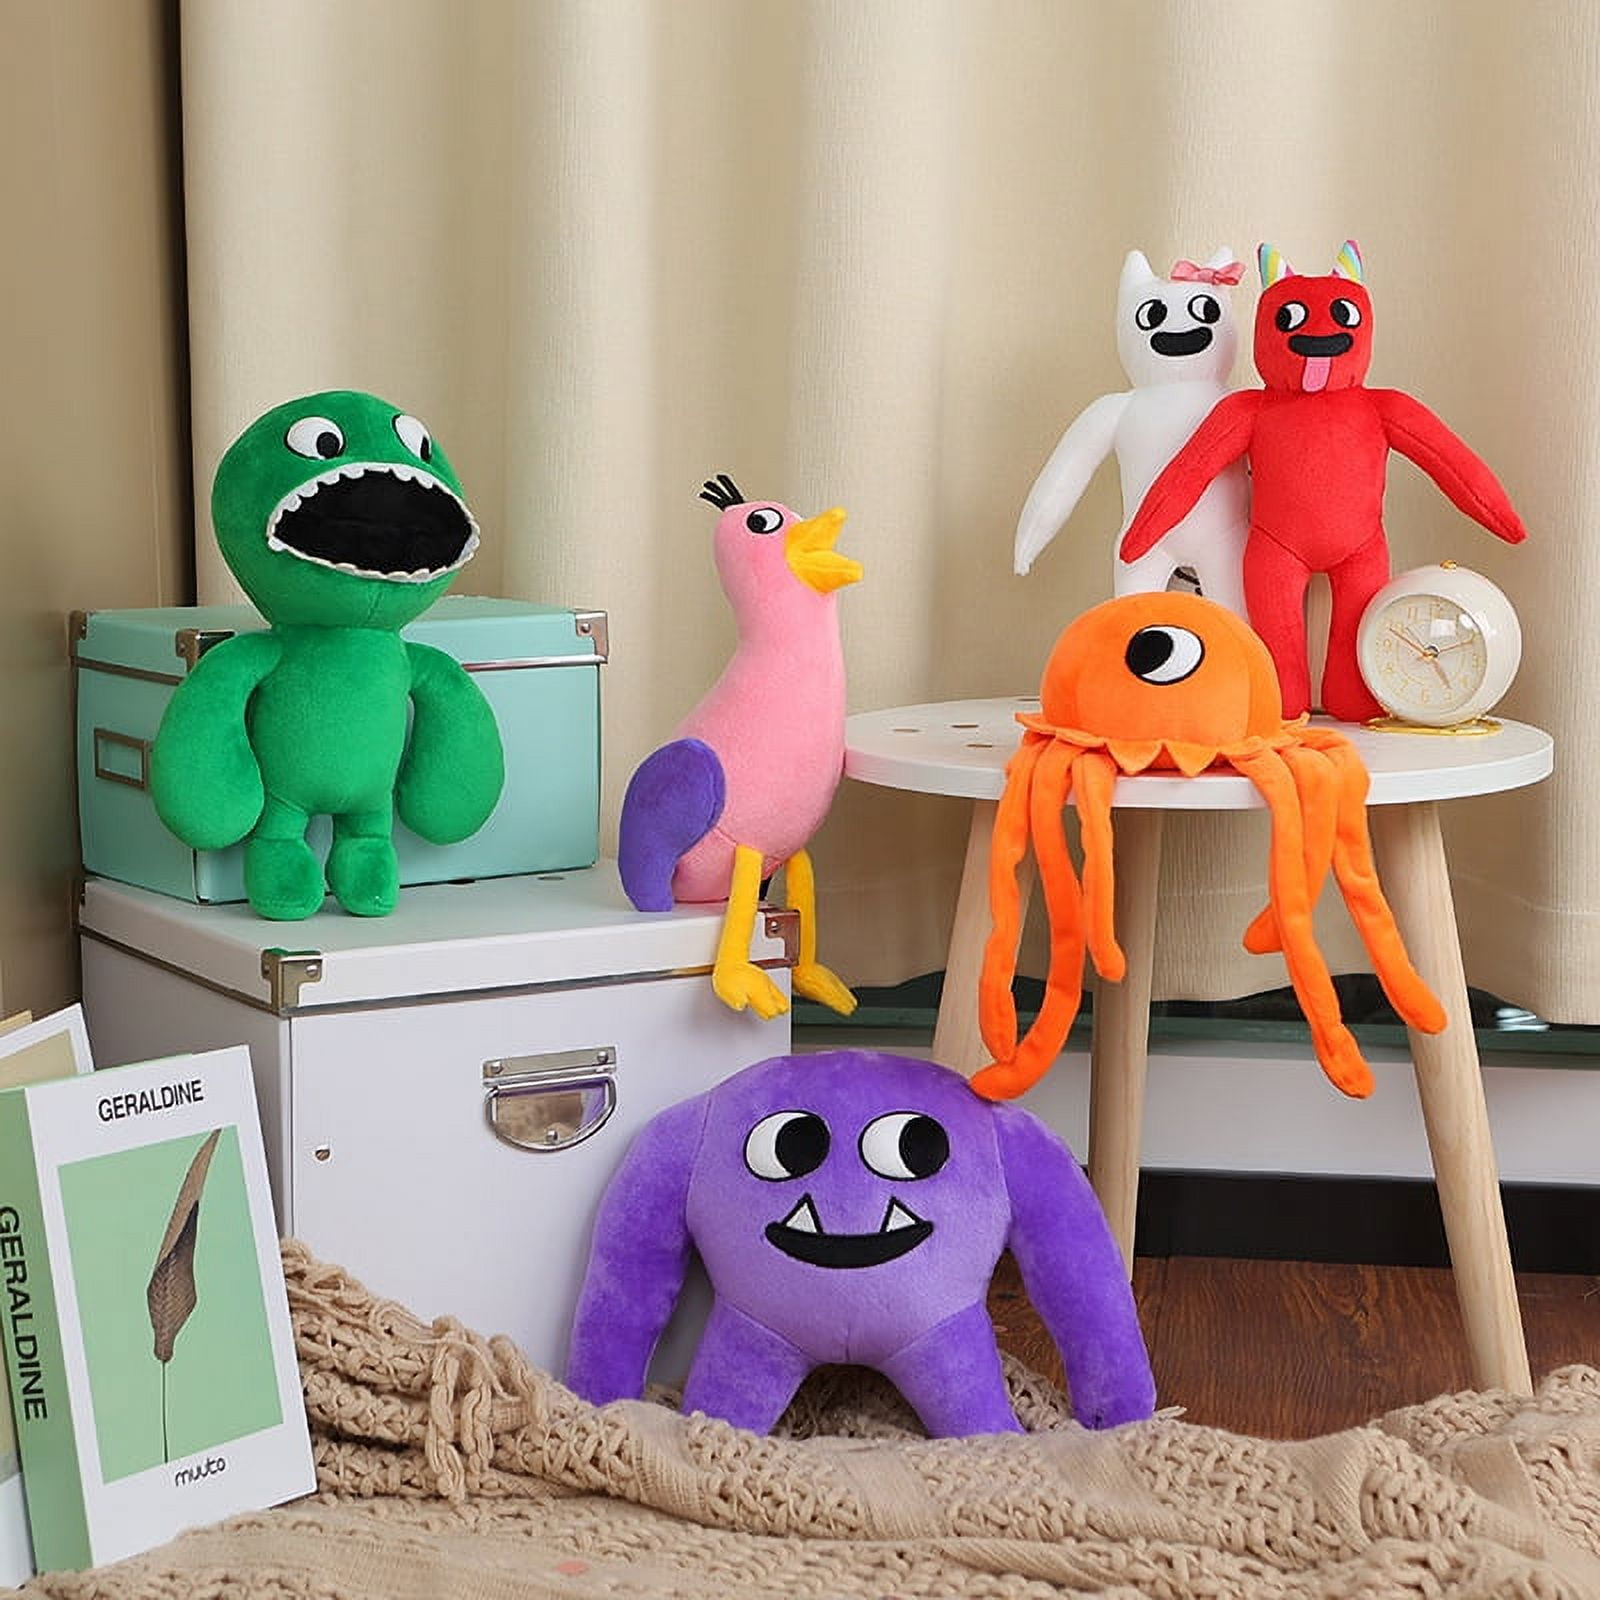 Rainbow Friends Plush Blue/Green/Orange/Pink/Game Peripheral Rainbow  Friends Chapter 2 Plush Horror Monster Soft Stuffed Pillow, for Kids and  Fans